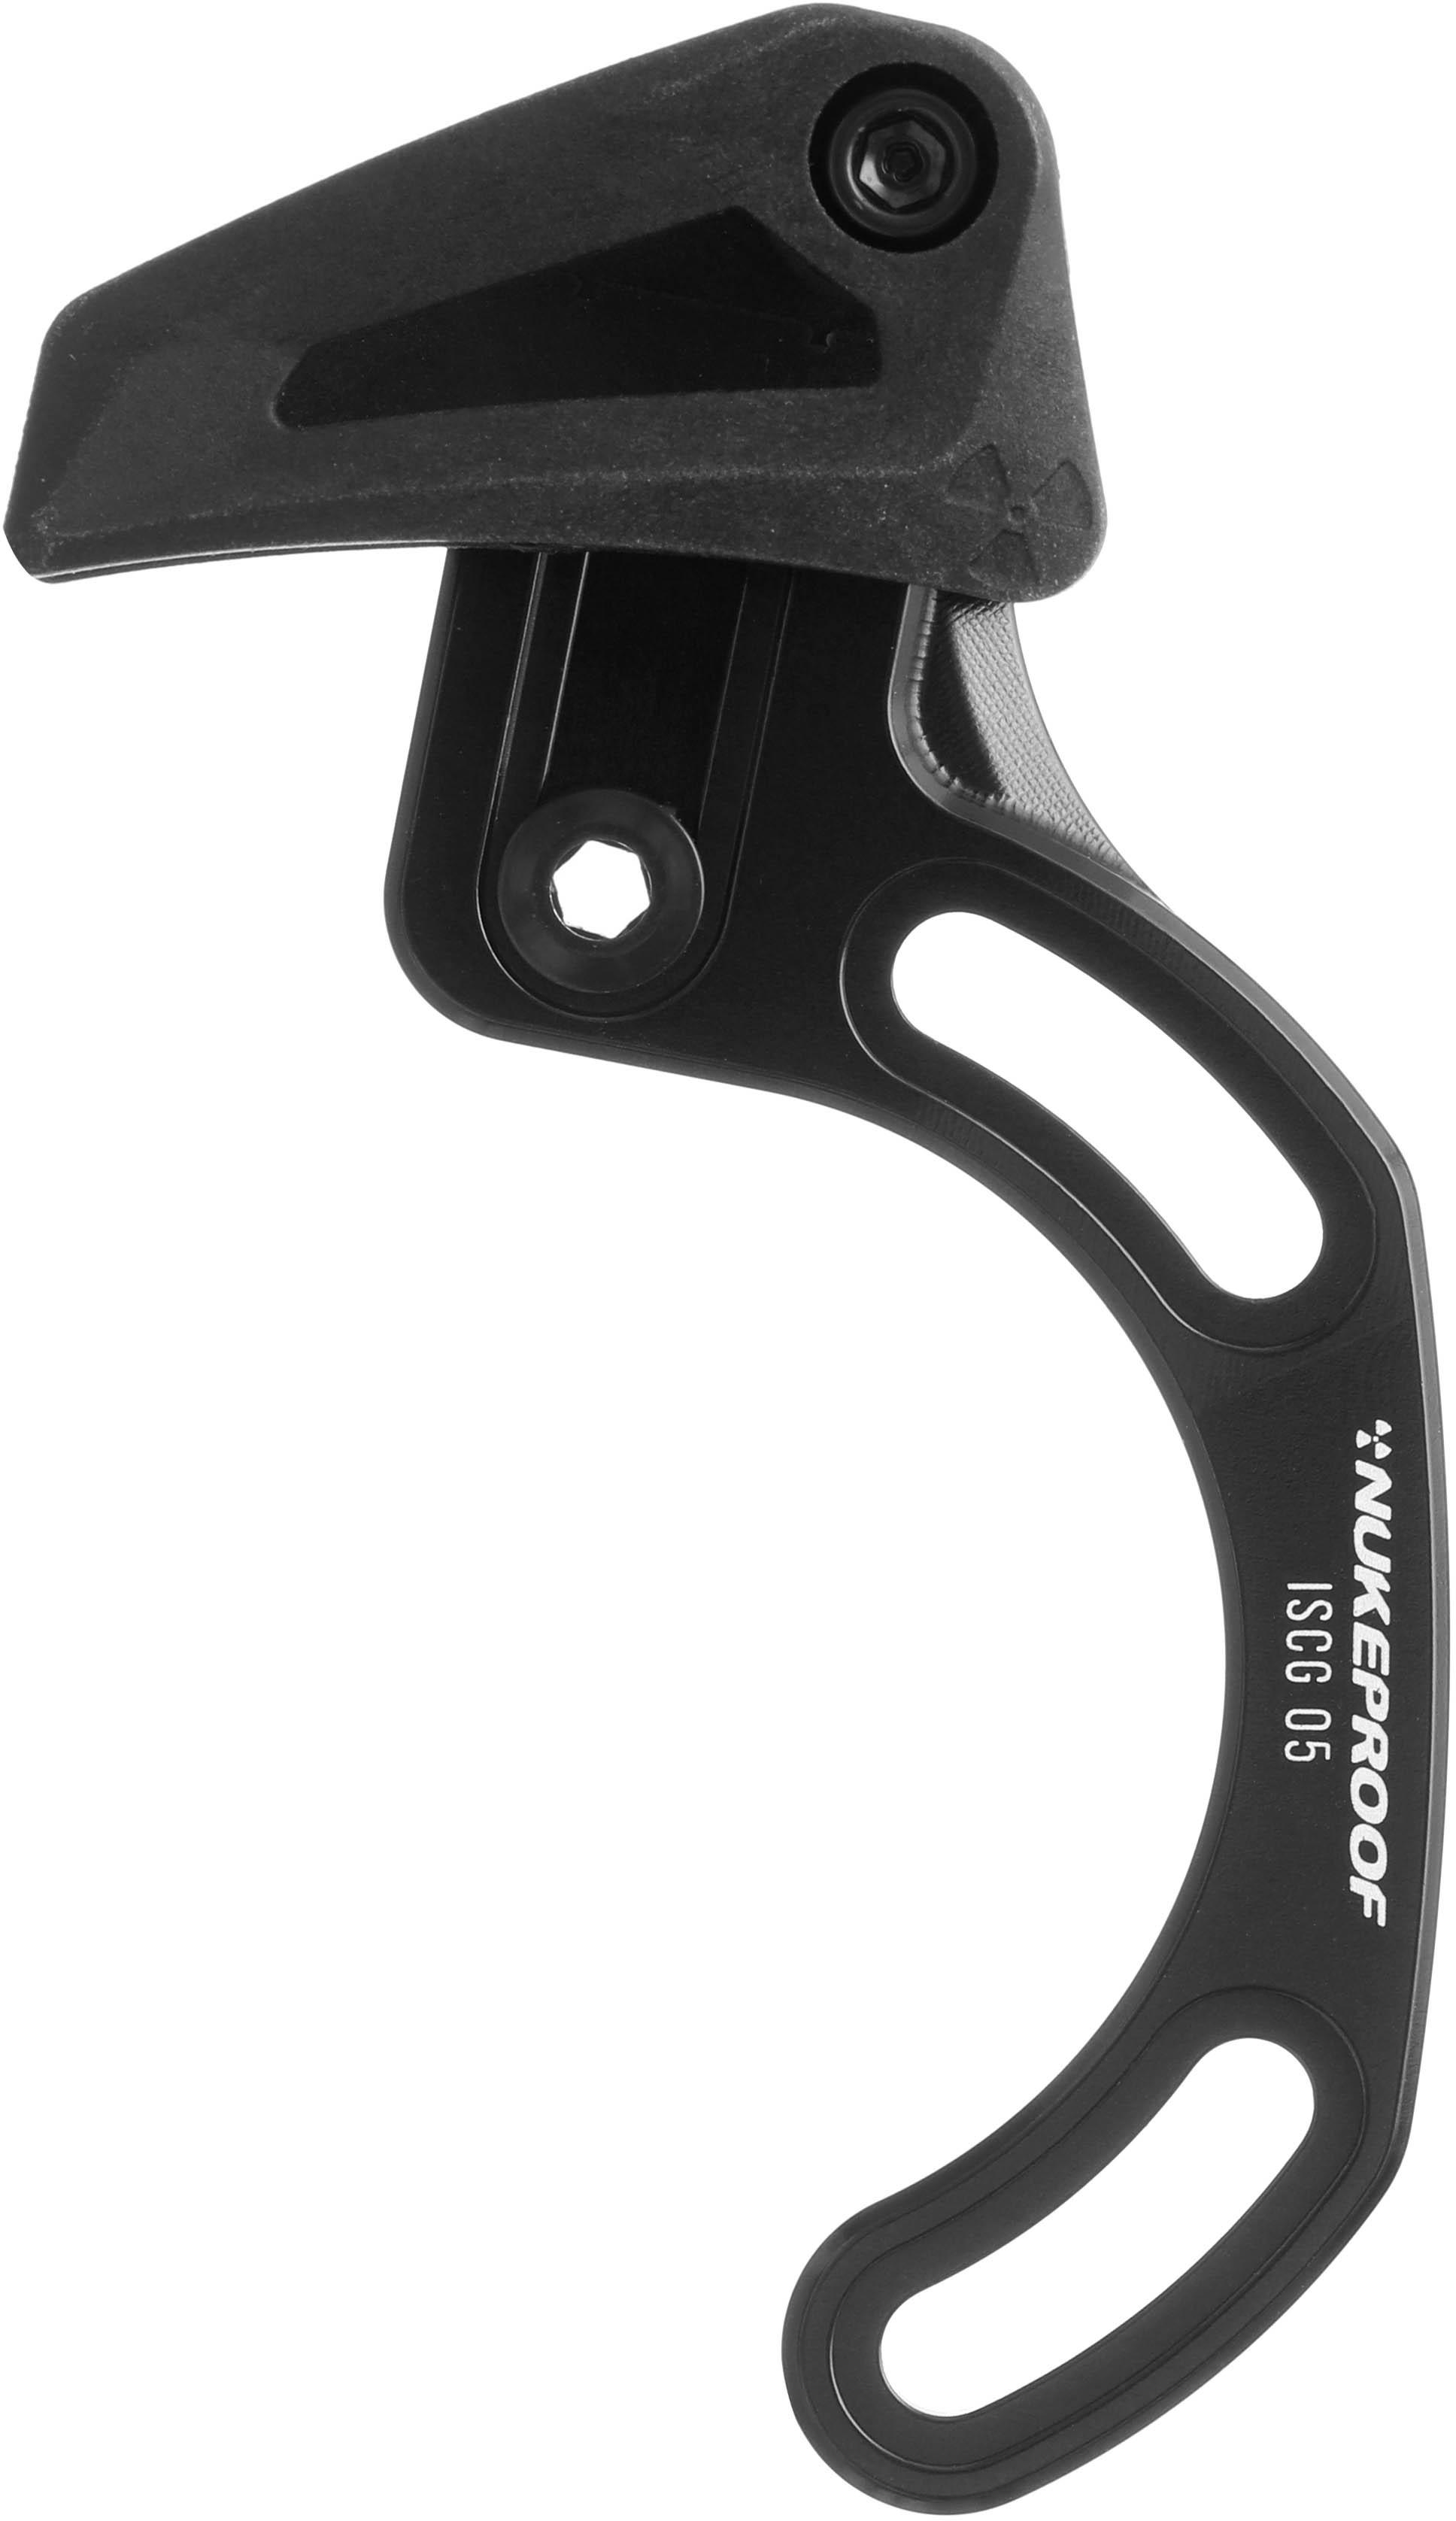 Nukeproof Chain Guide Iscg 05 Top Guide  Black/black